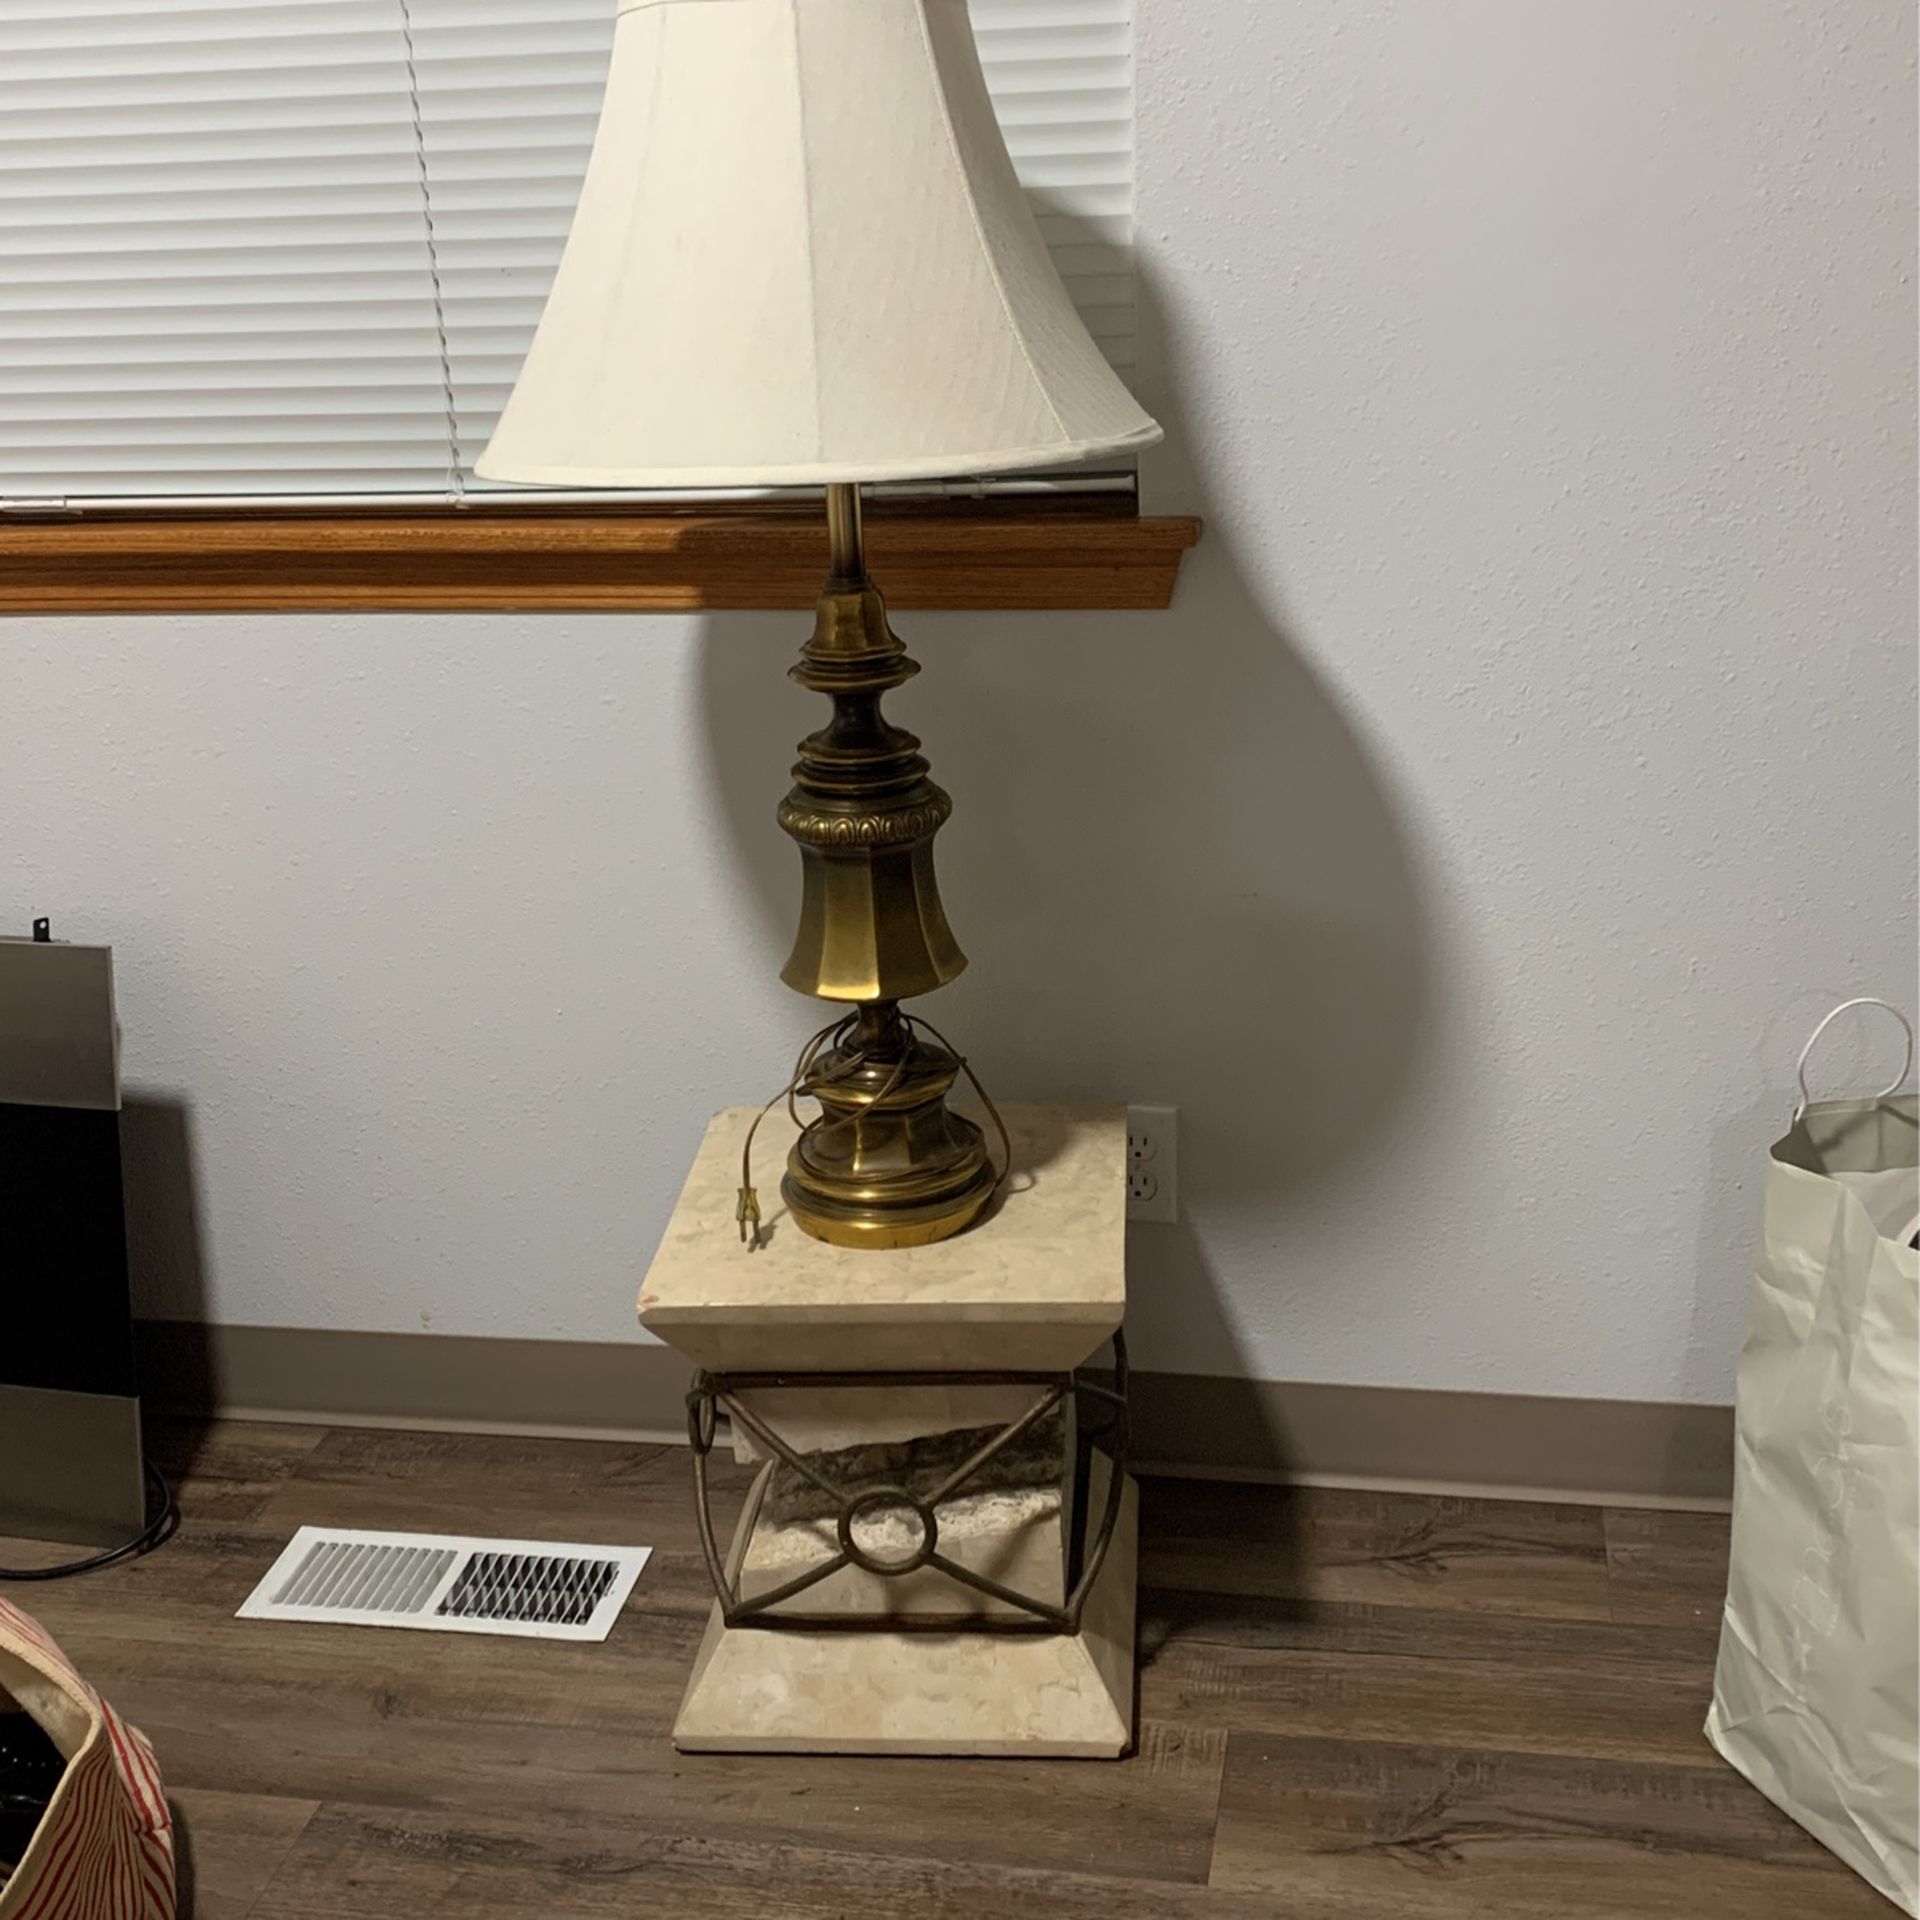 Antique Lamp And Table